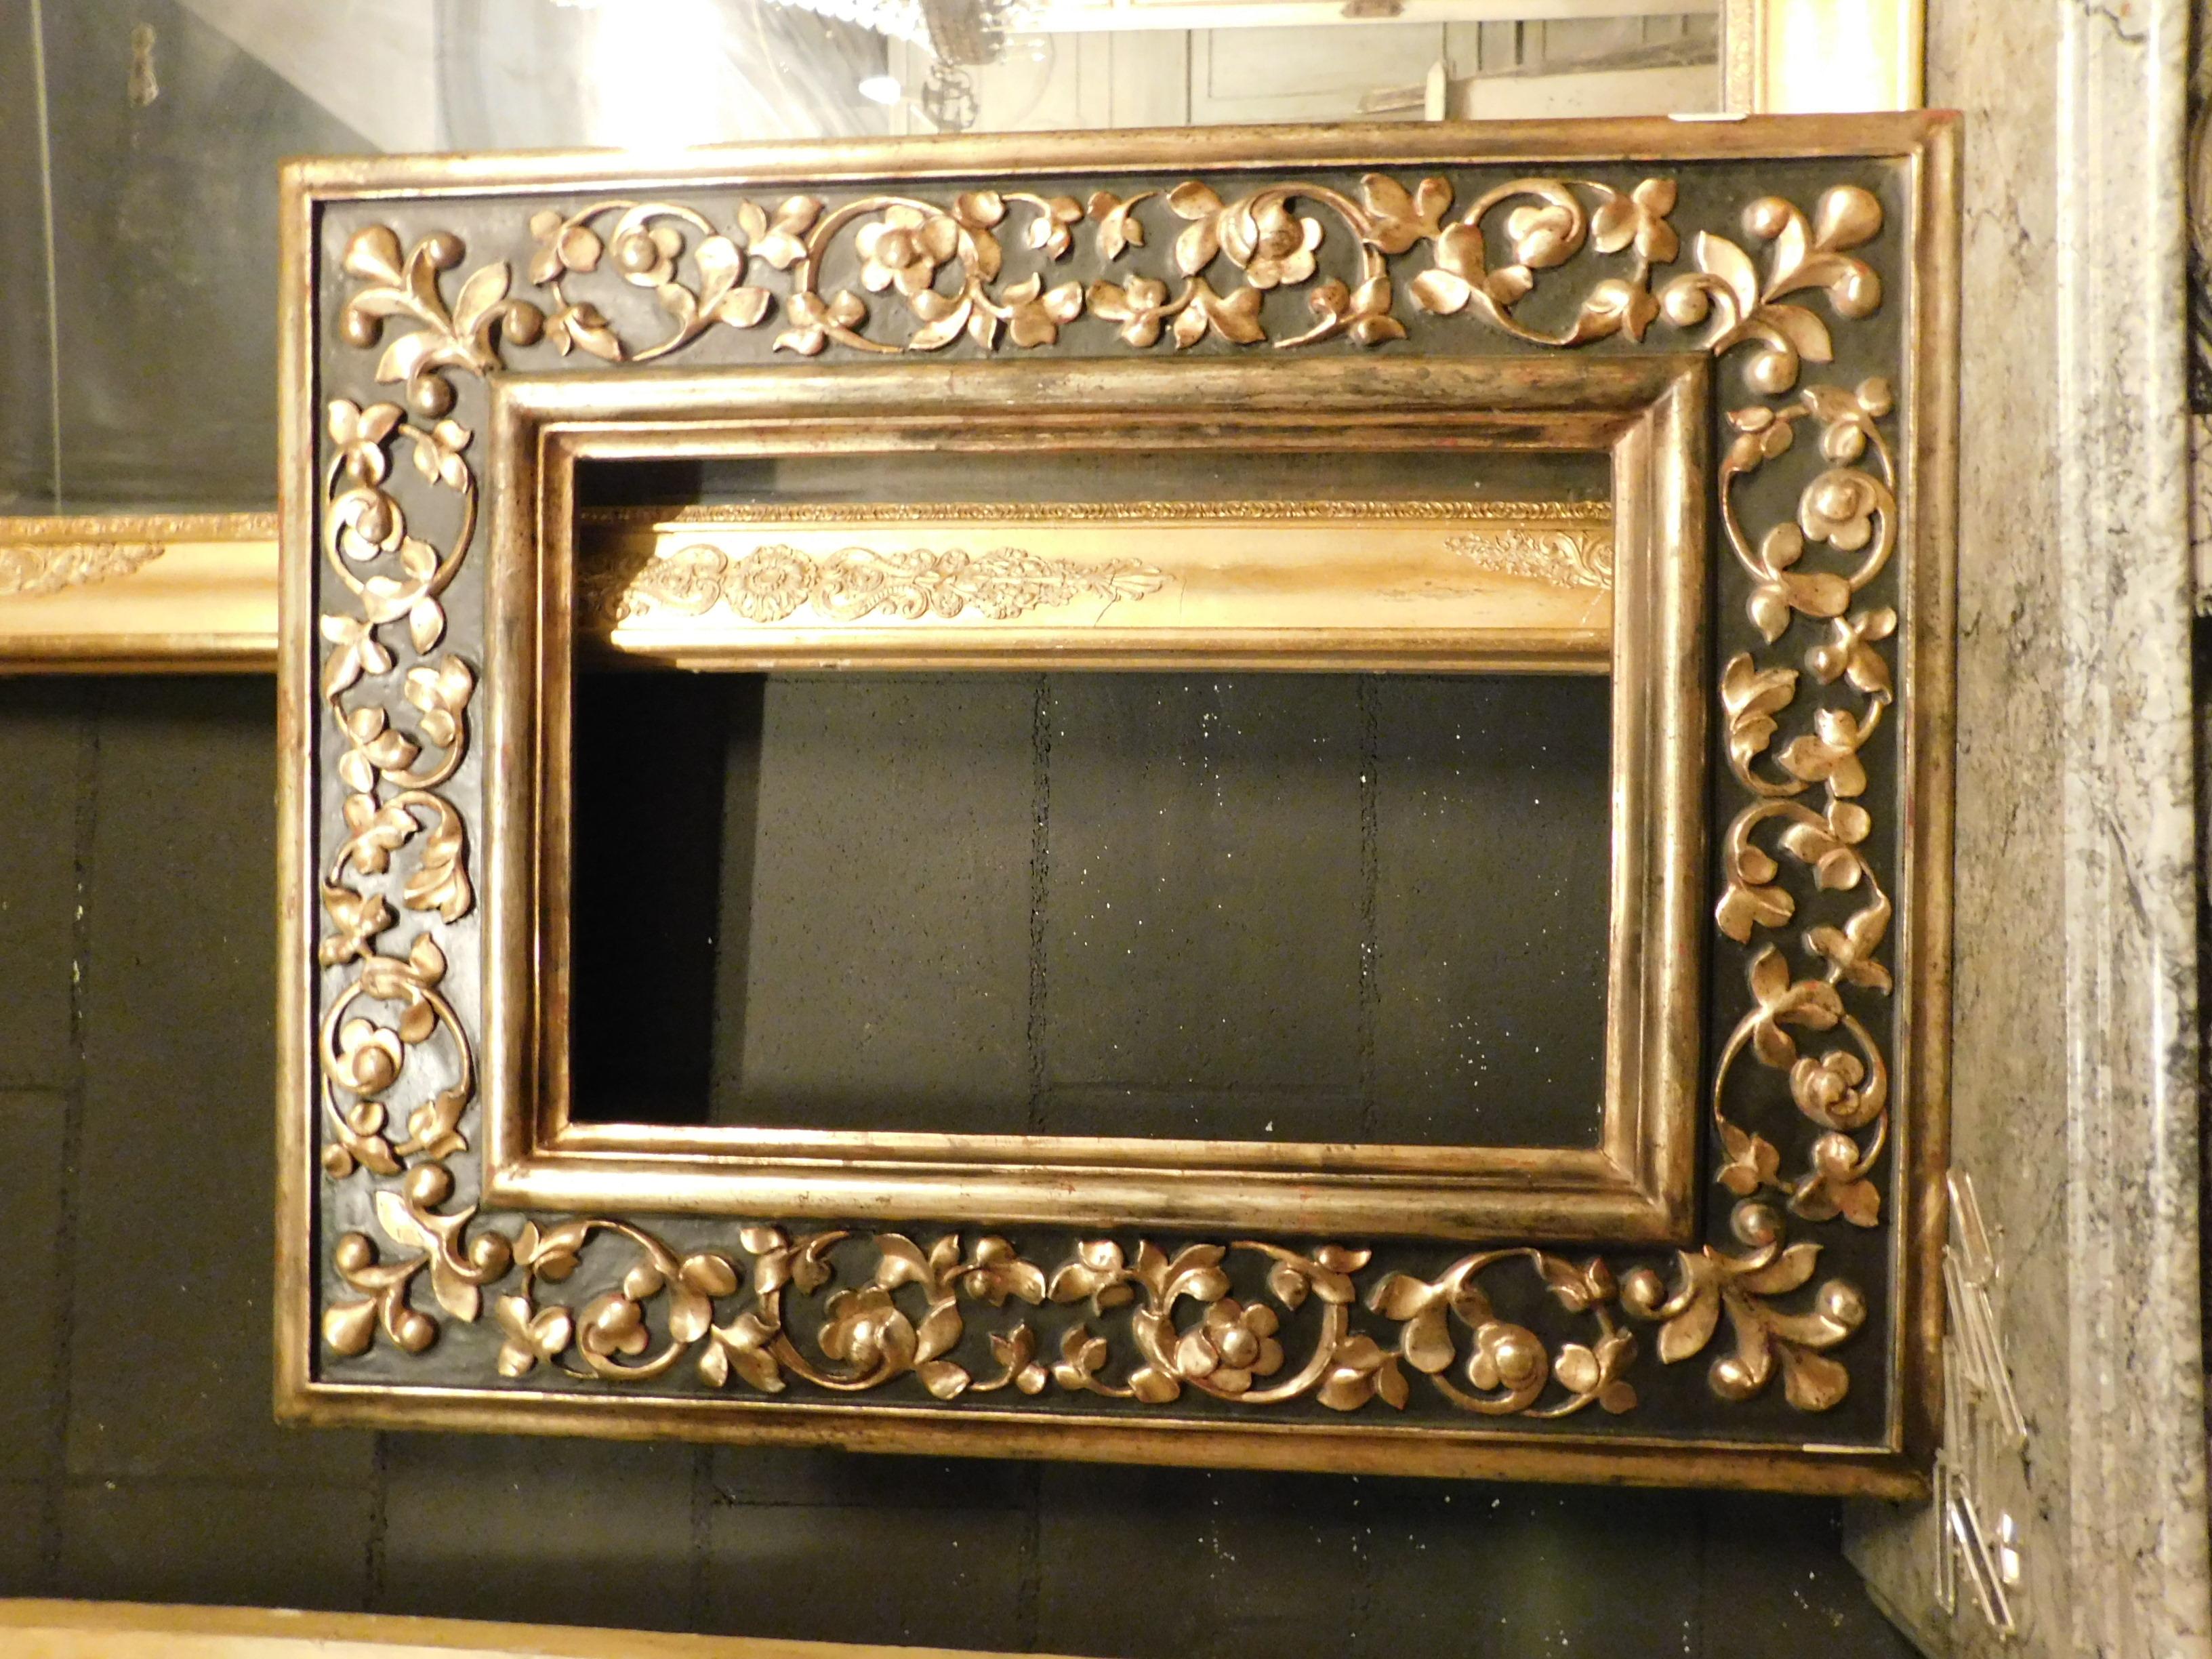 Mid-19th Century 19th Century Antique Frame Carved and Decorated with Golden Floral Motifs